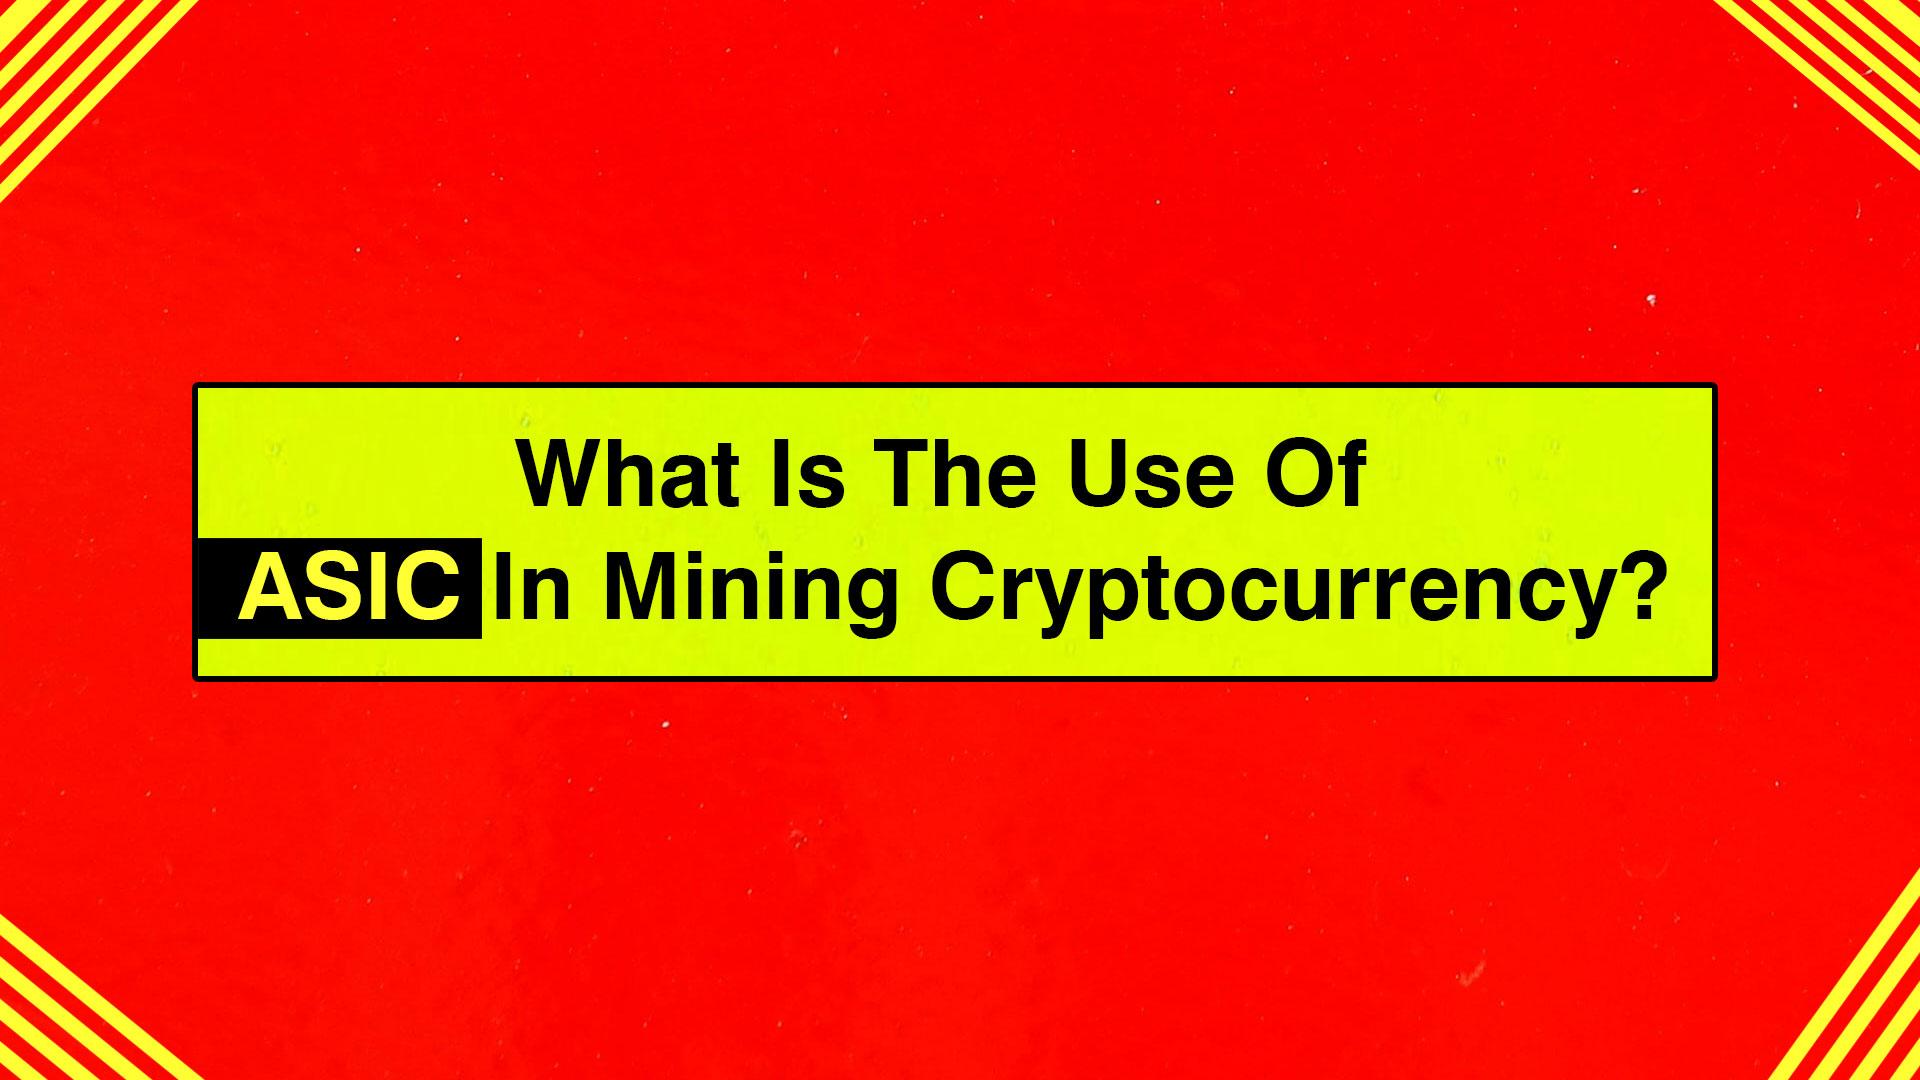 What Is The Use Of ASIC In Mining Cryptocurrency?